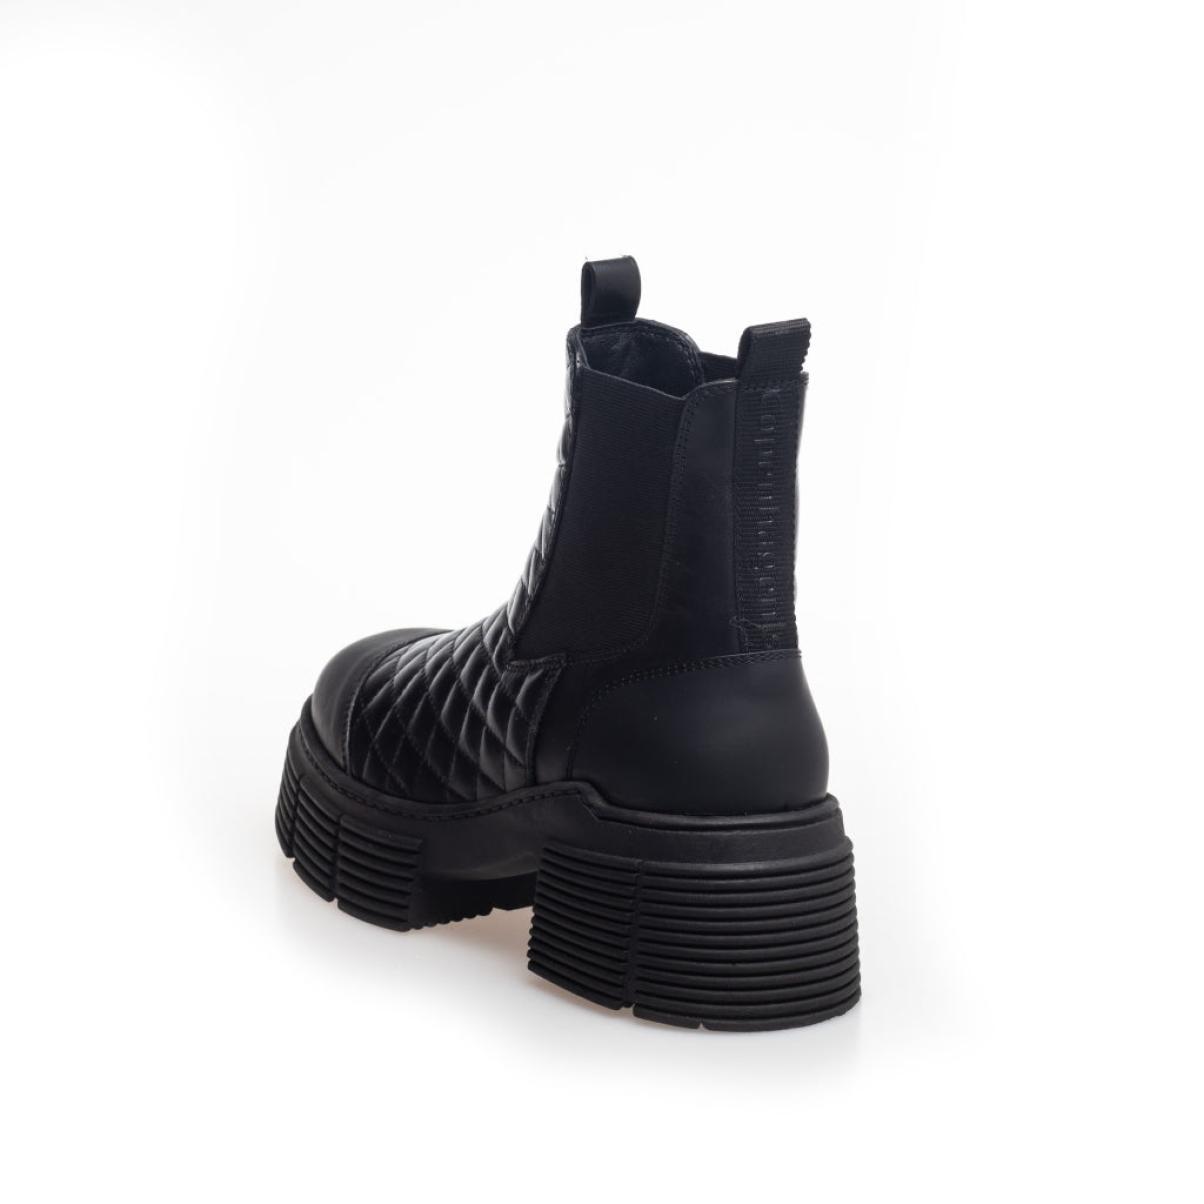 Refined Ankle Boots Be There - Black Copenhagen Shoes Women - 2